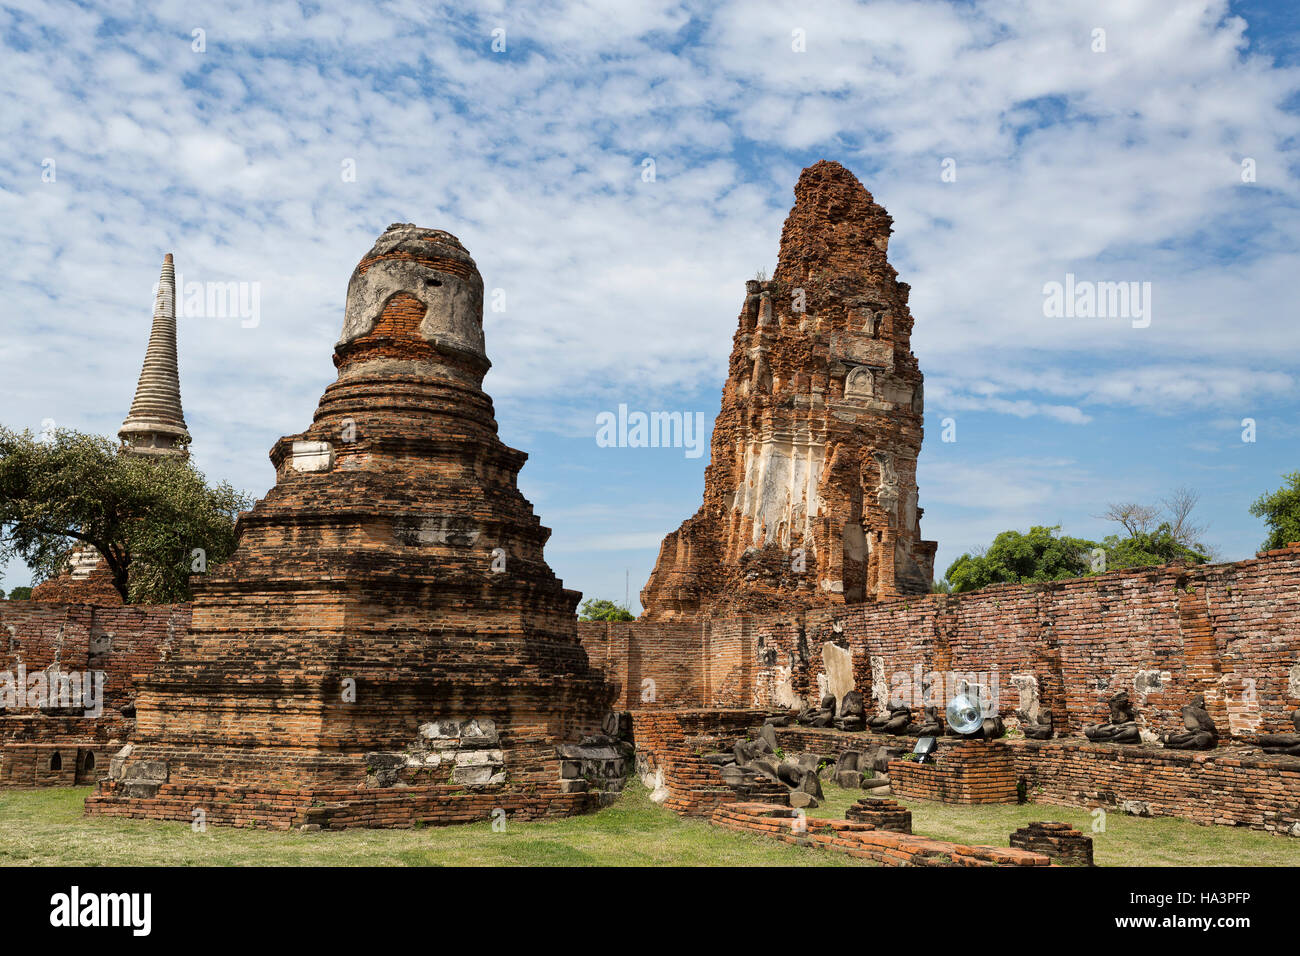 Detail of Wat Mahathat, Temple of the Great Relic, a Buddhist temple in Ayutthaya, central Thailand Stock Photo